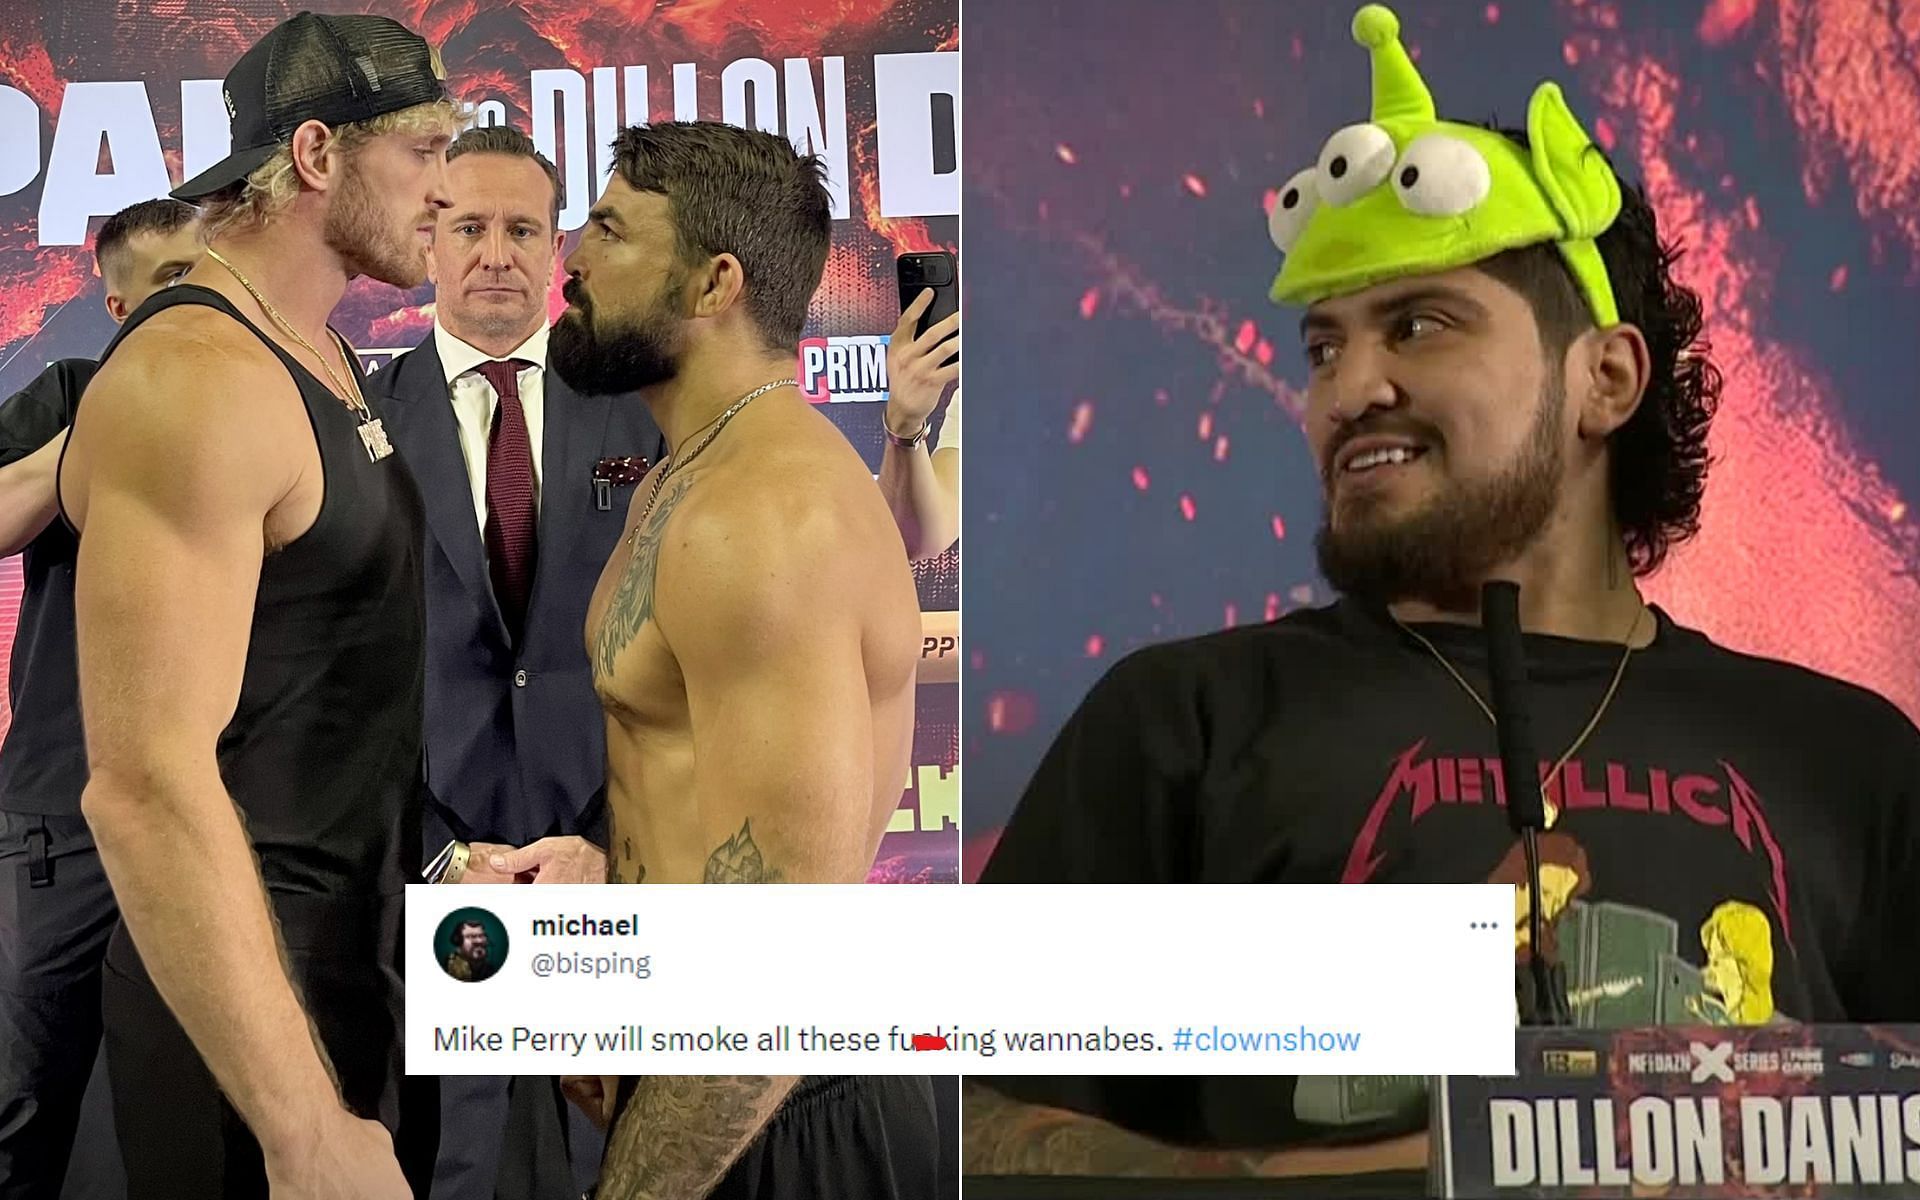 Logan Paul and Mike Perry [Left], Michael Bisping tweet [Middle], and Dillon Danis [Right] [Photo credit: @MichaelBensonn, @DAZNBoxing, @bisping - Twitter]